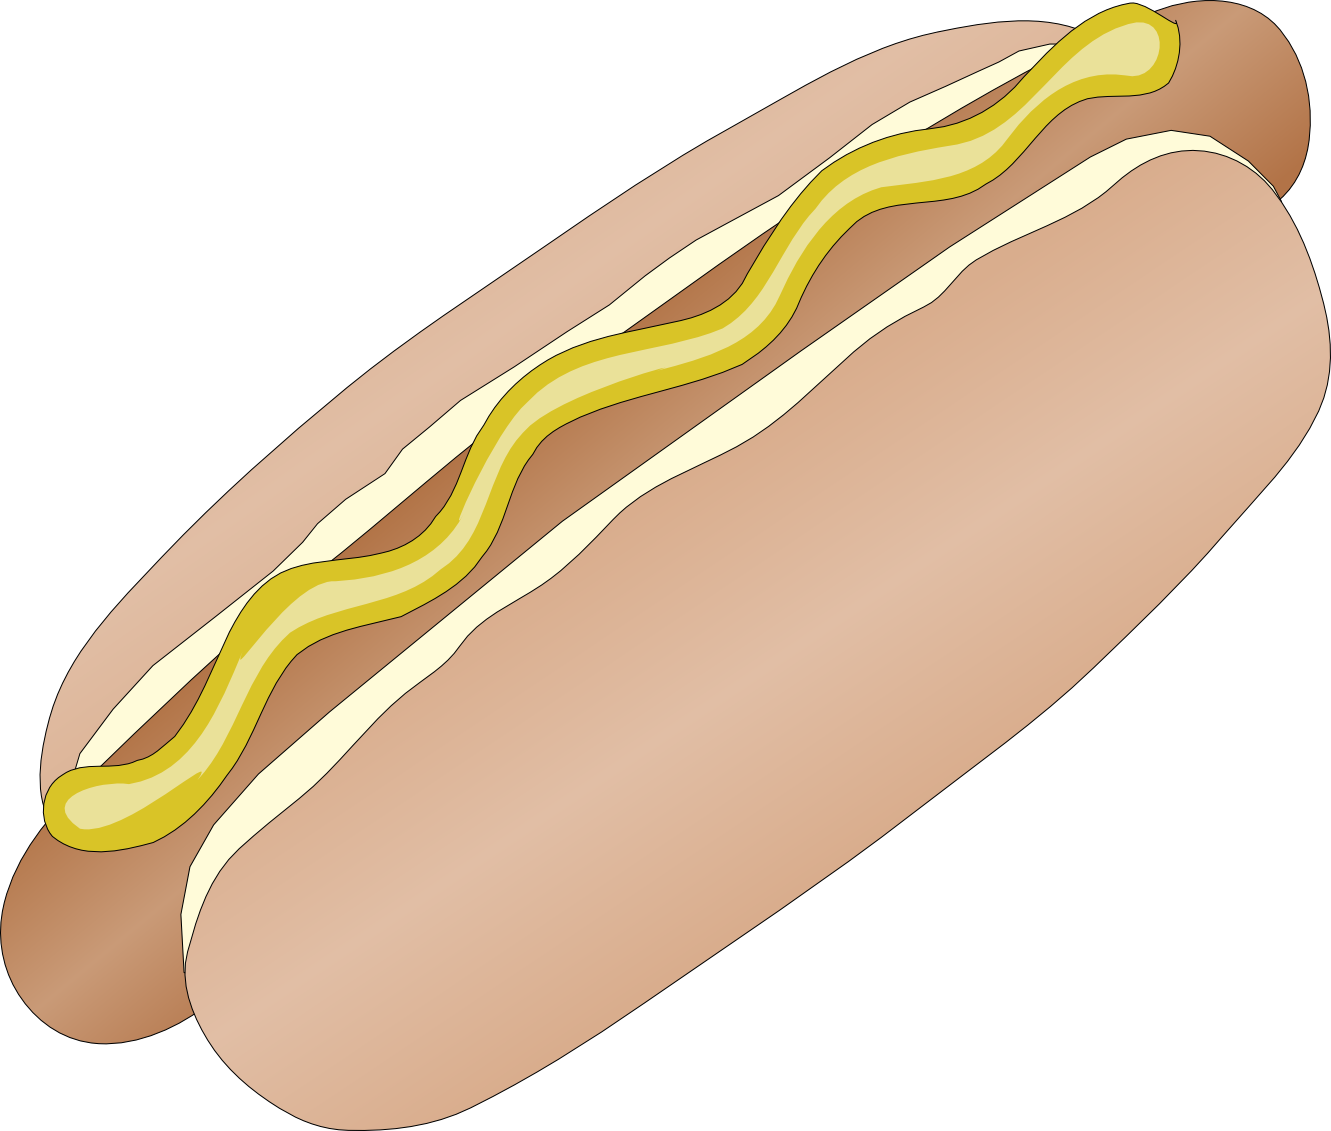 Hot Dog Images Free - Clipart library